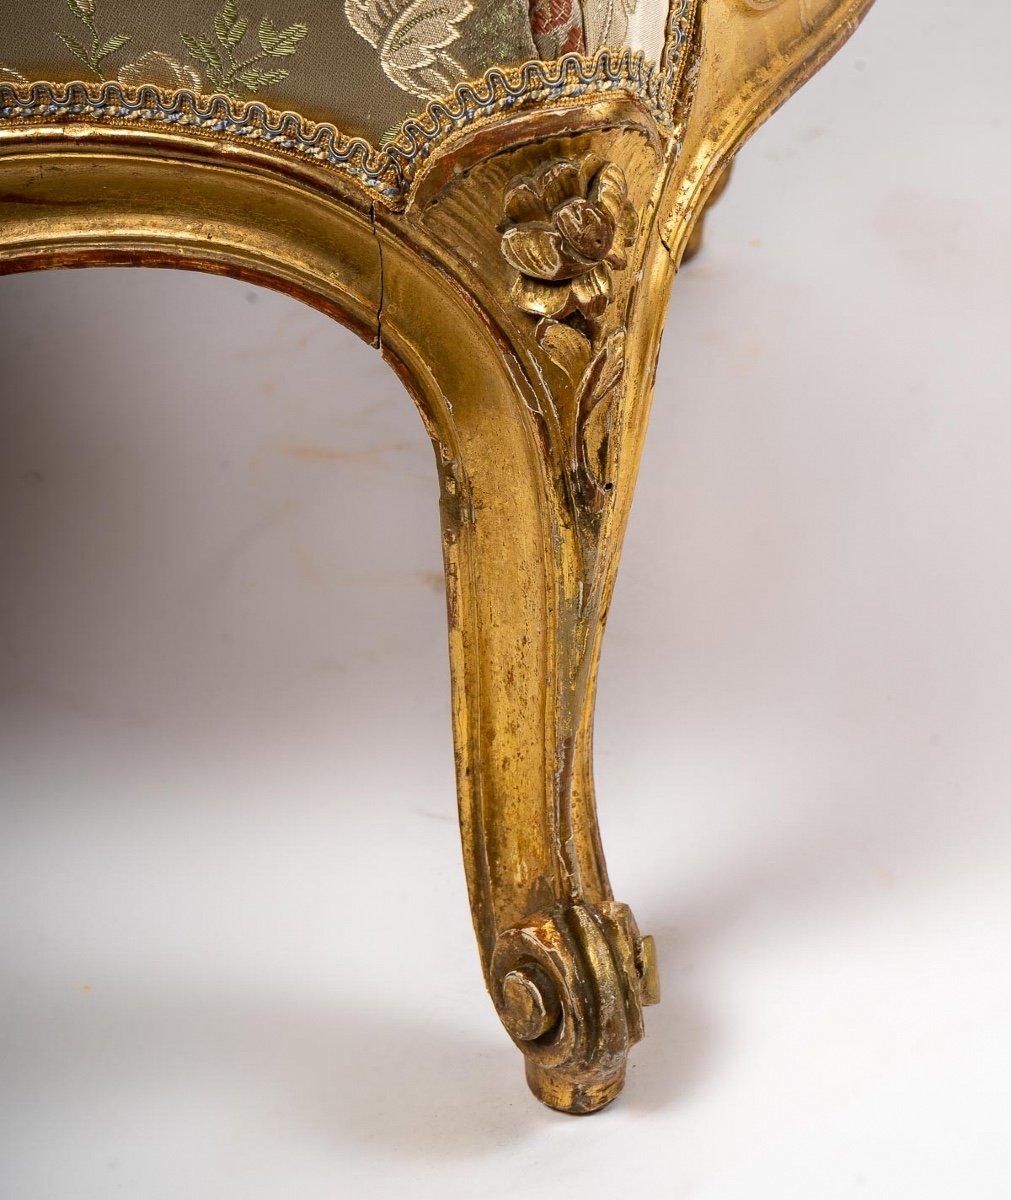 A pair of carved and gilded wood Bergères, Louis XV style cambered legs with silk fabric. Seat with a large cushion. In perfect condition.
Late 19th century, Napoleon III period.
Measures: H: 102 cm, W: 78 cm; D: 80 cm.